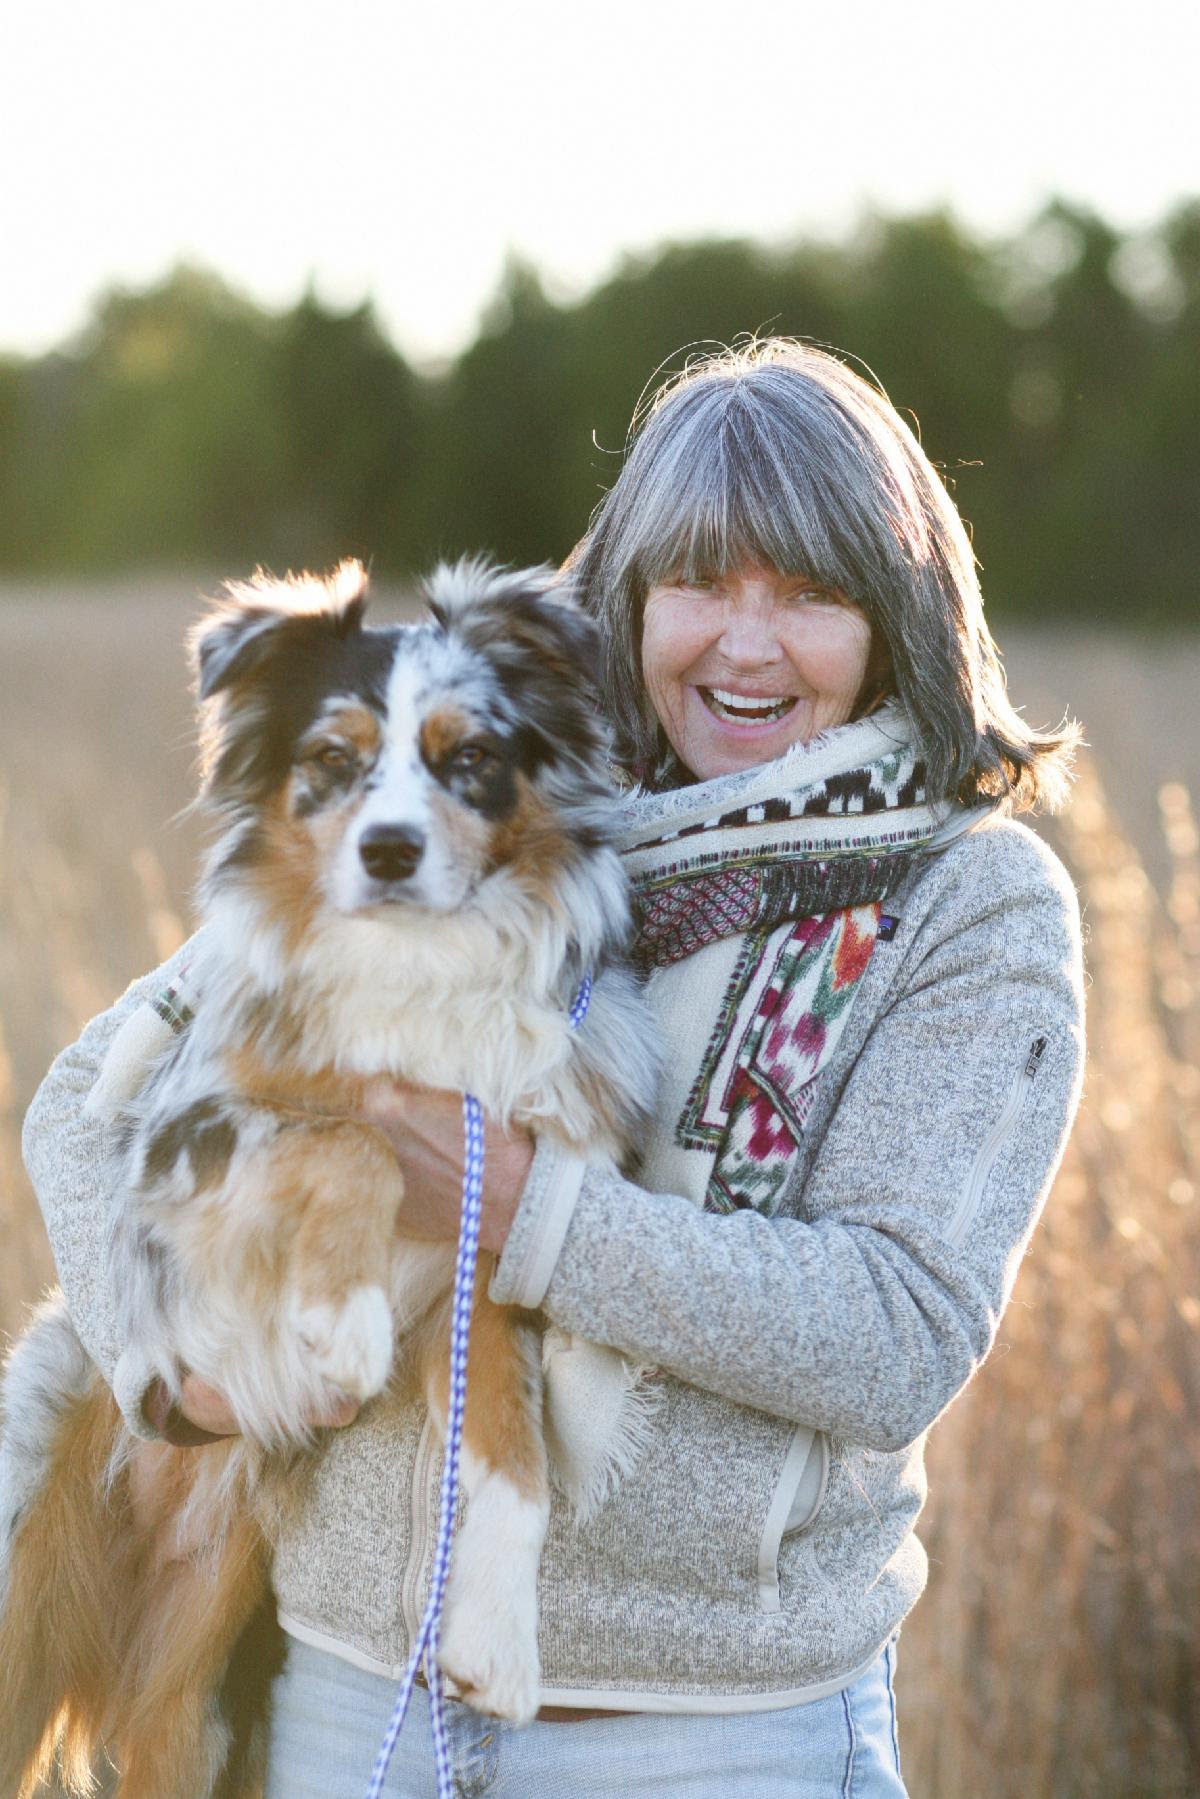 Tigger Montague is an expert on equine nutrition and supplements with over thirty years experience as a rider, researcher, formulator and author of Whole Foods for Horses, pictured with her dog Wookie